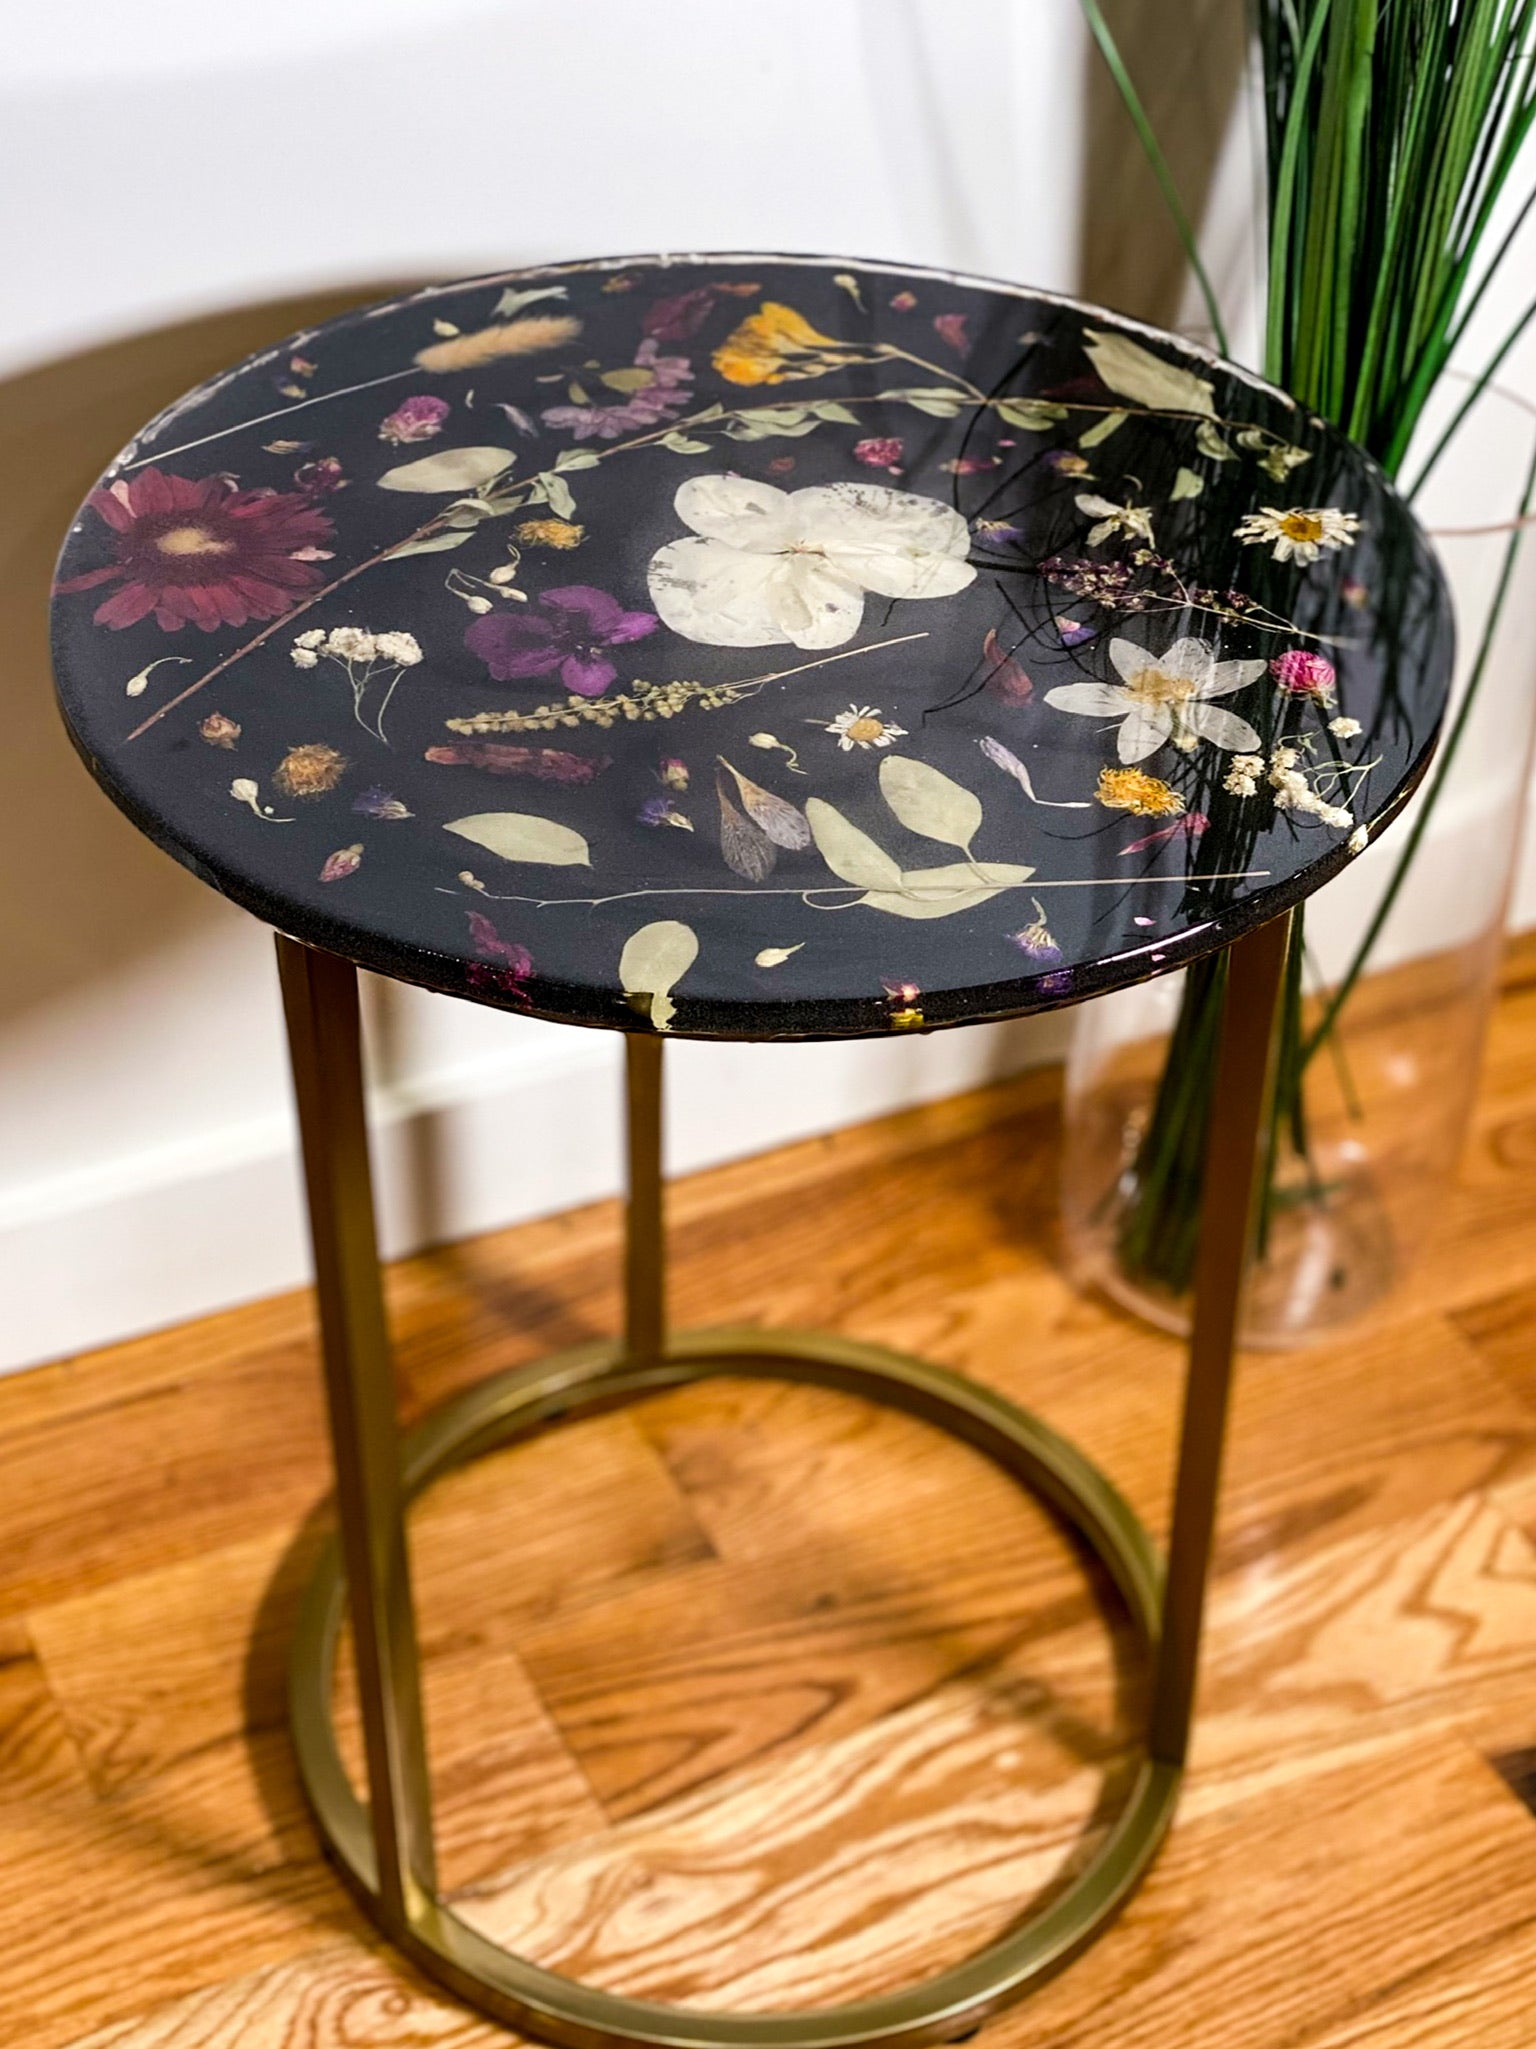 Whimsical Floral Table